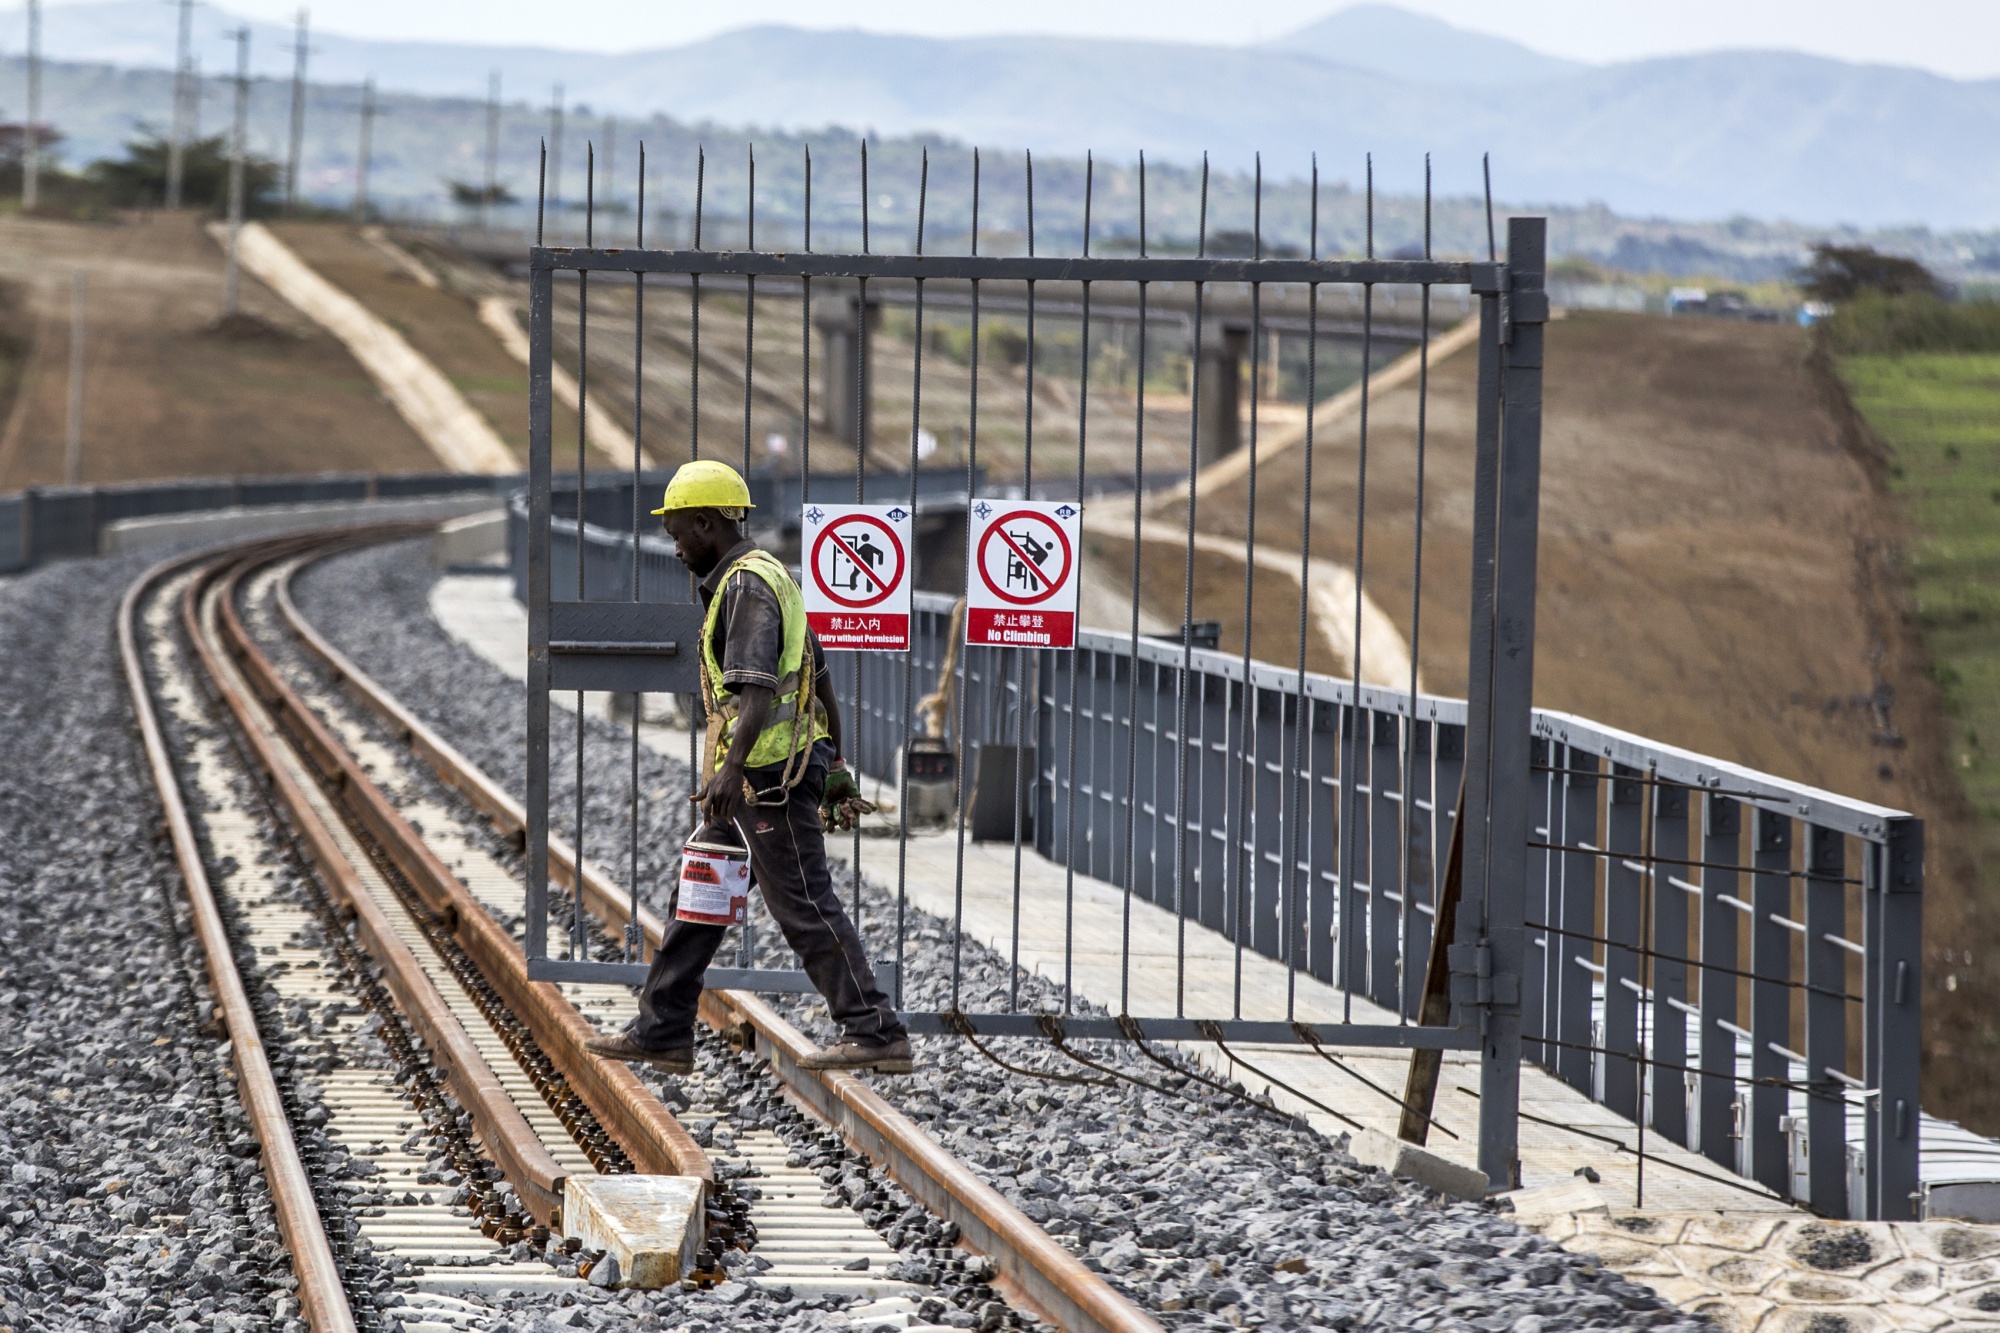 China's Built A Railroad To Nowhere In Kenya